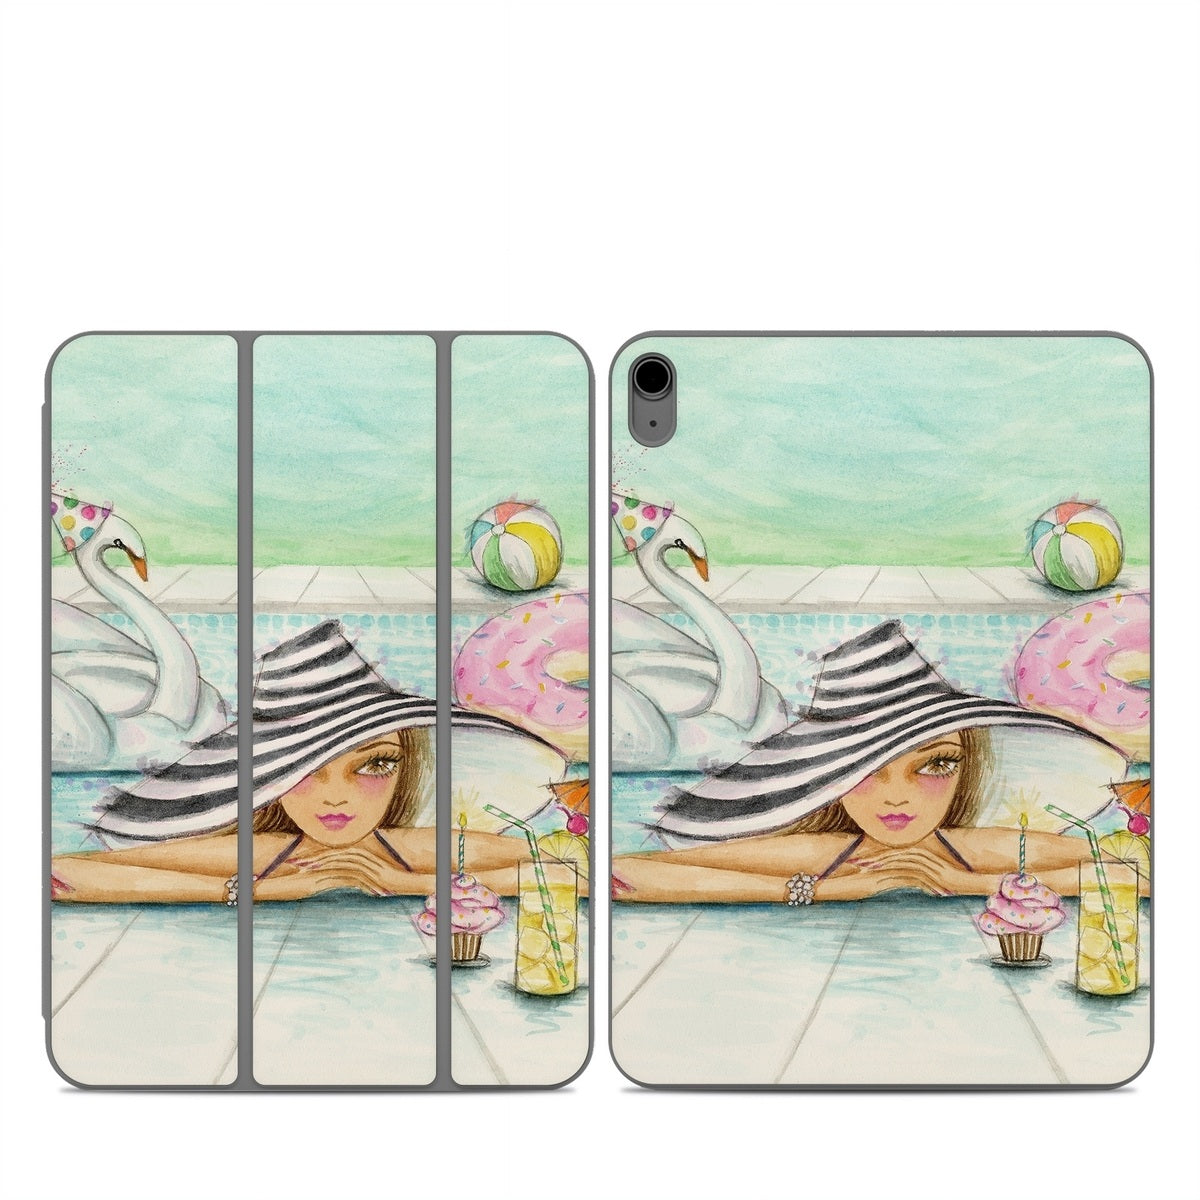 Delphine at the Pool Party - Apple Smart Folio Skin